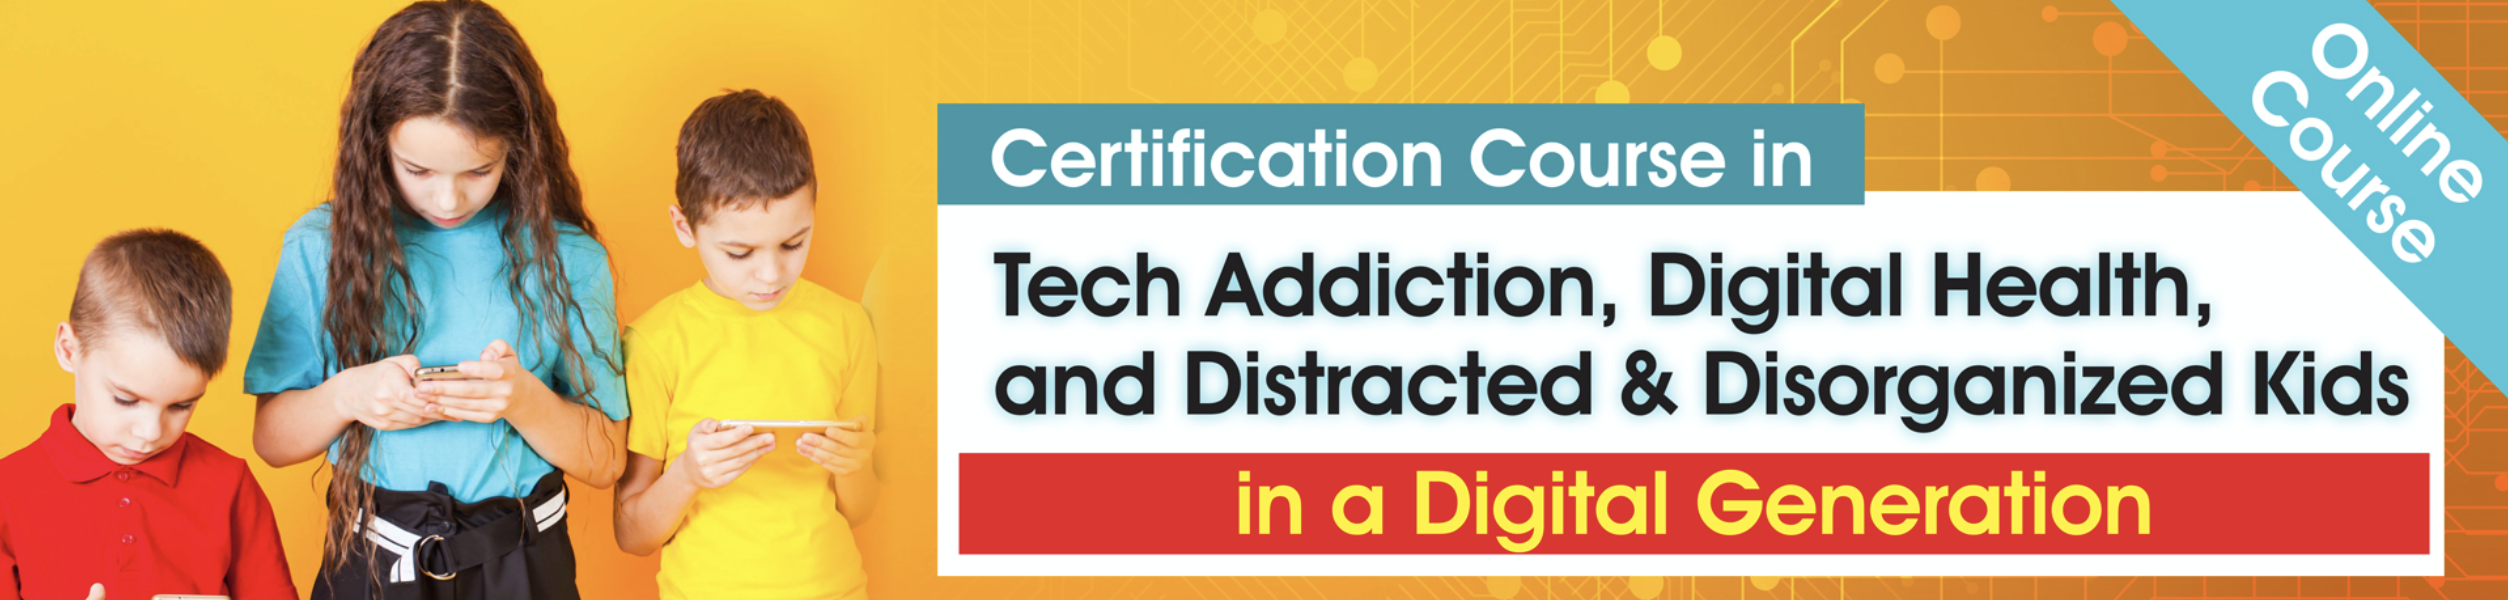 Certification Course in Tech Addiction, Digital Health, and Distracted & Disorganized Kids in a Digital Generation